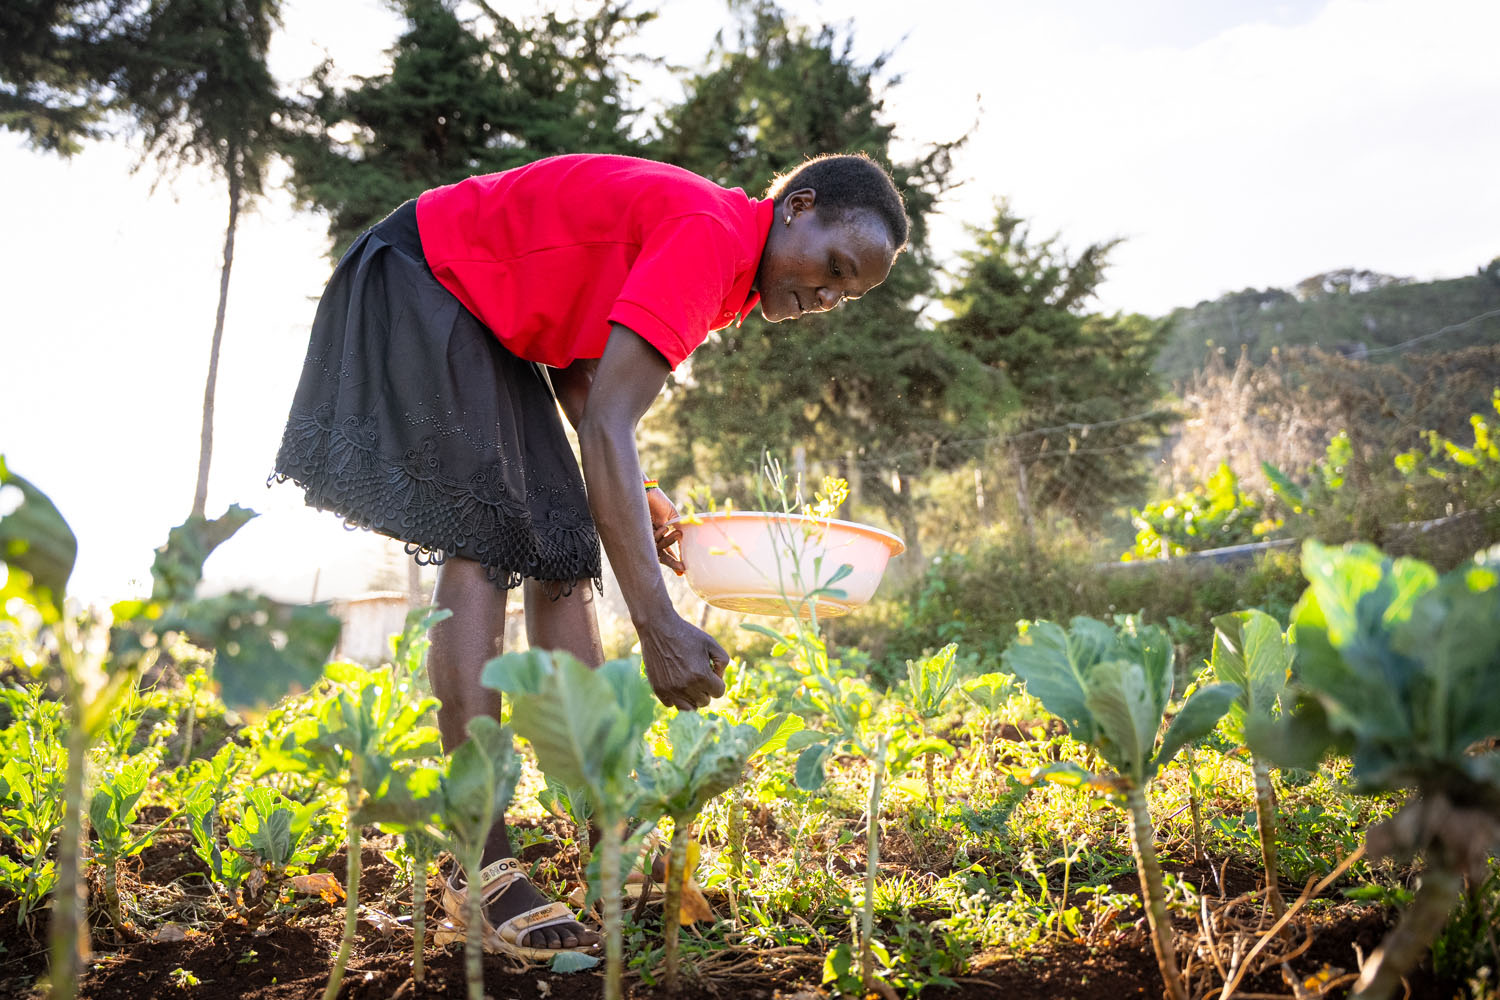 A Kenyan woman wearing a red polo shirt bends down to gather vegetables, holding a bowl. 